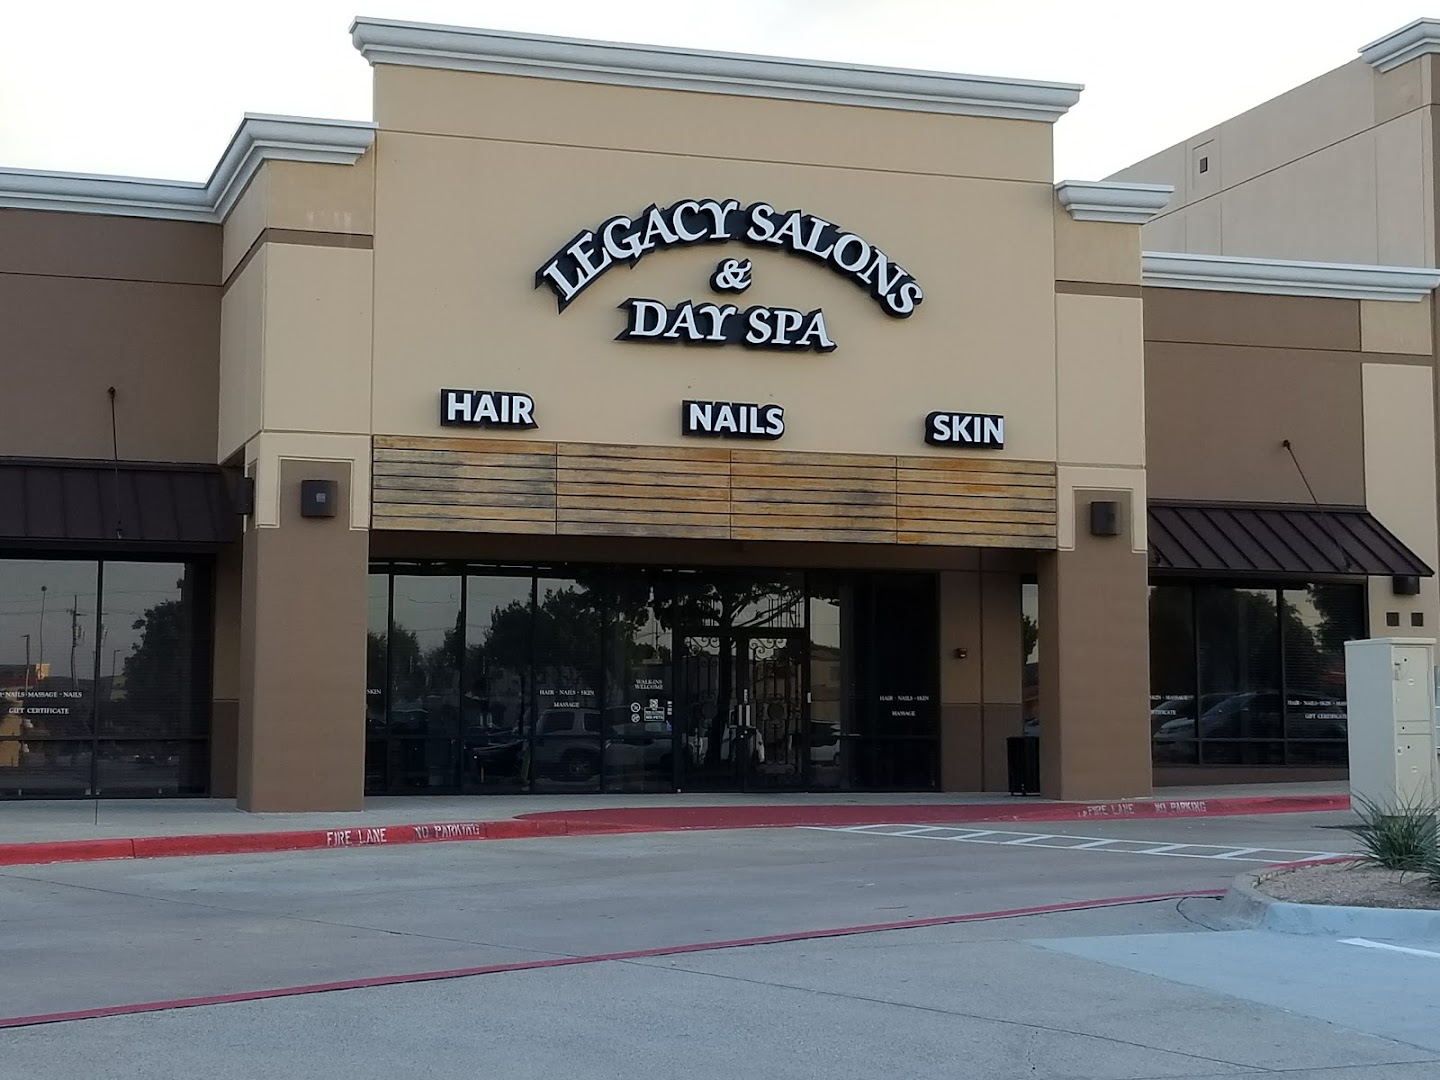 Legacy Salons & Day Spa